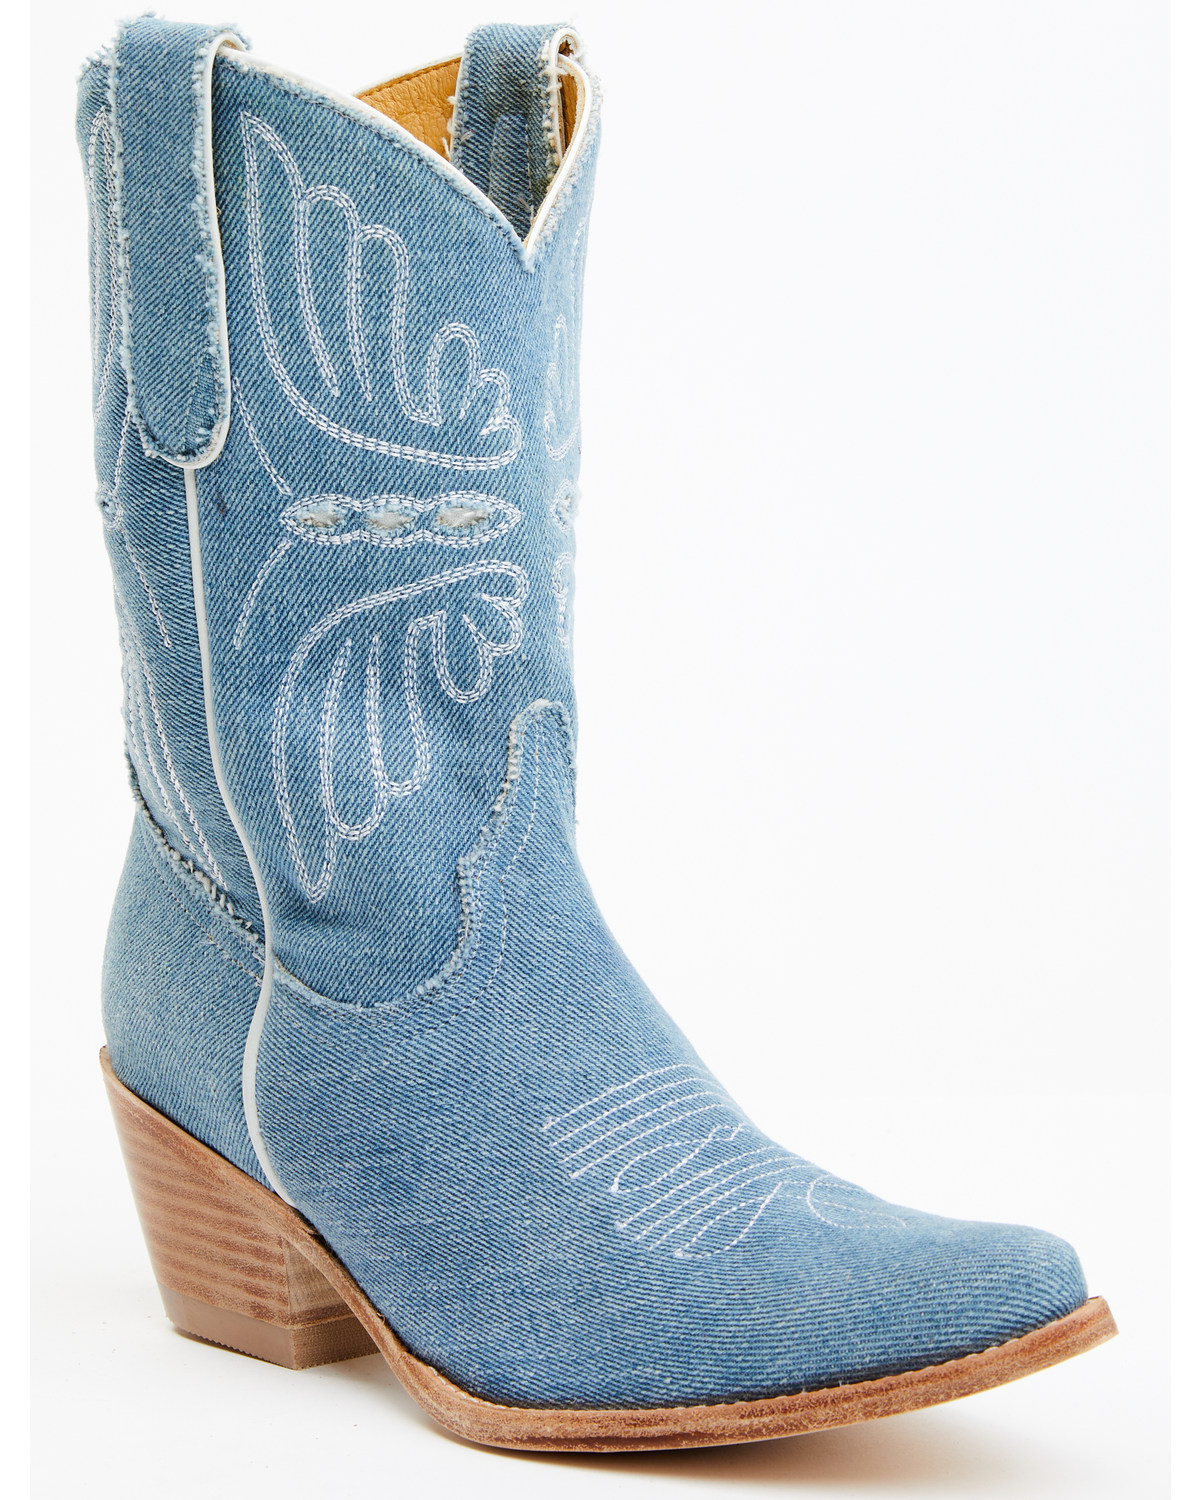 Idyllwind Women's Aces Denim Deux Western Boots - Pointed Toe